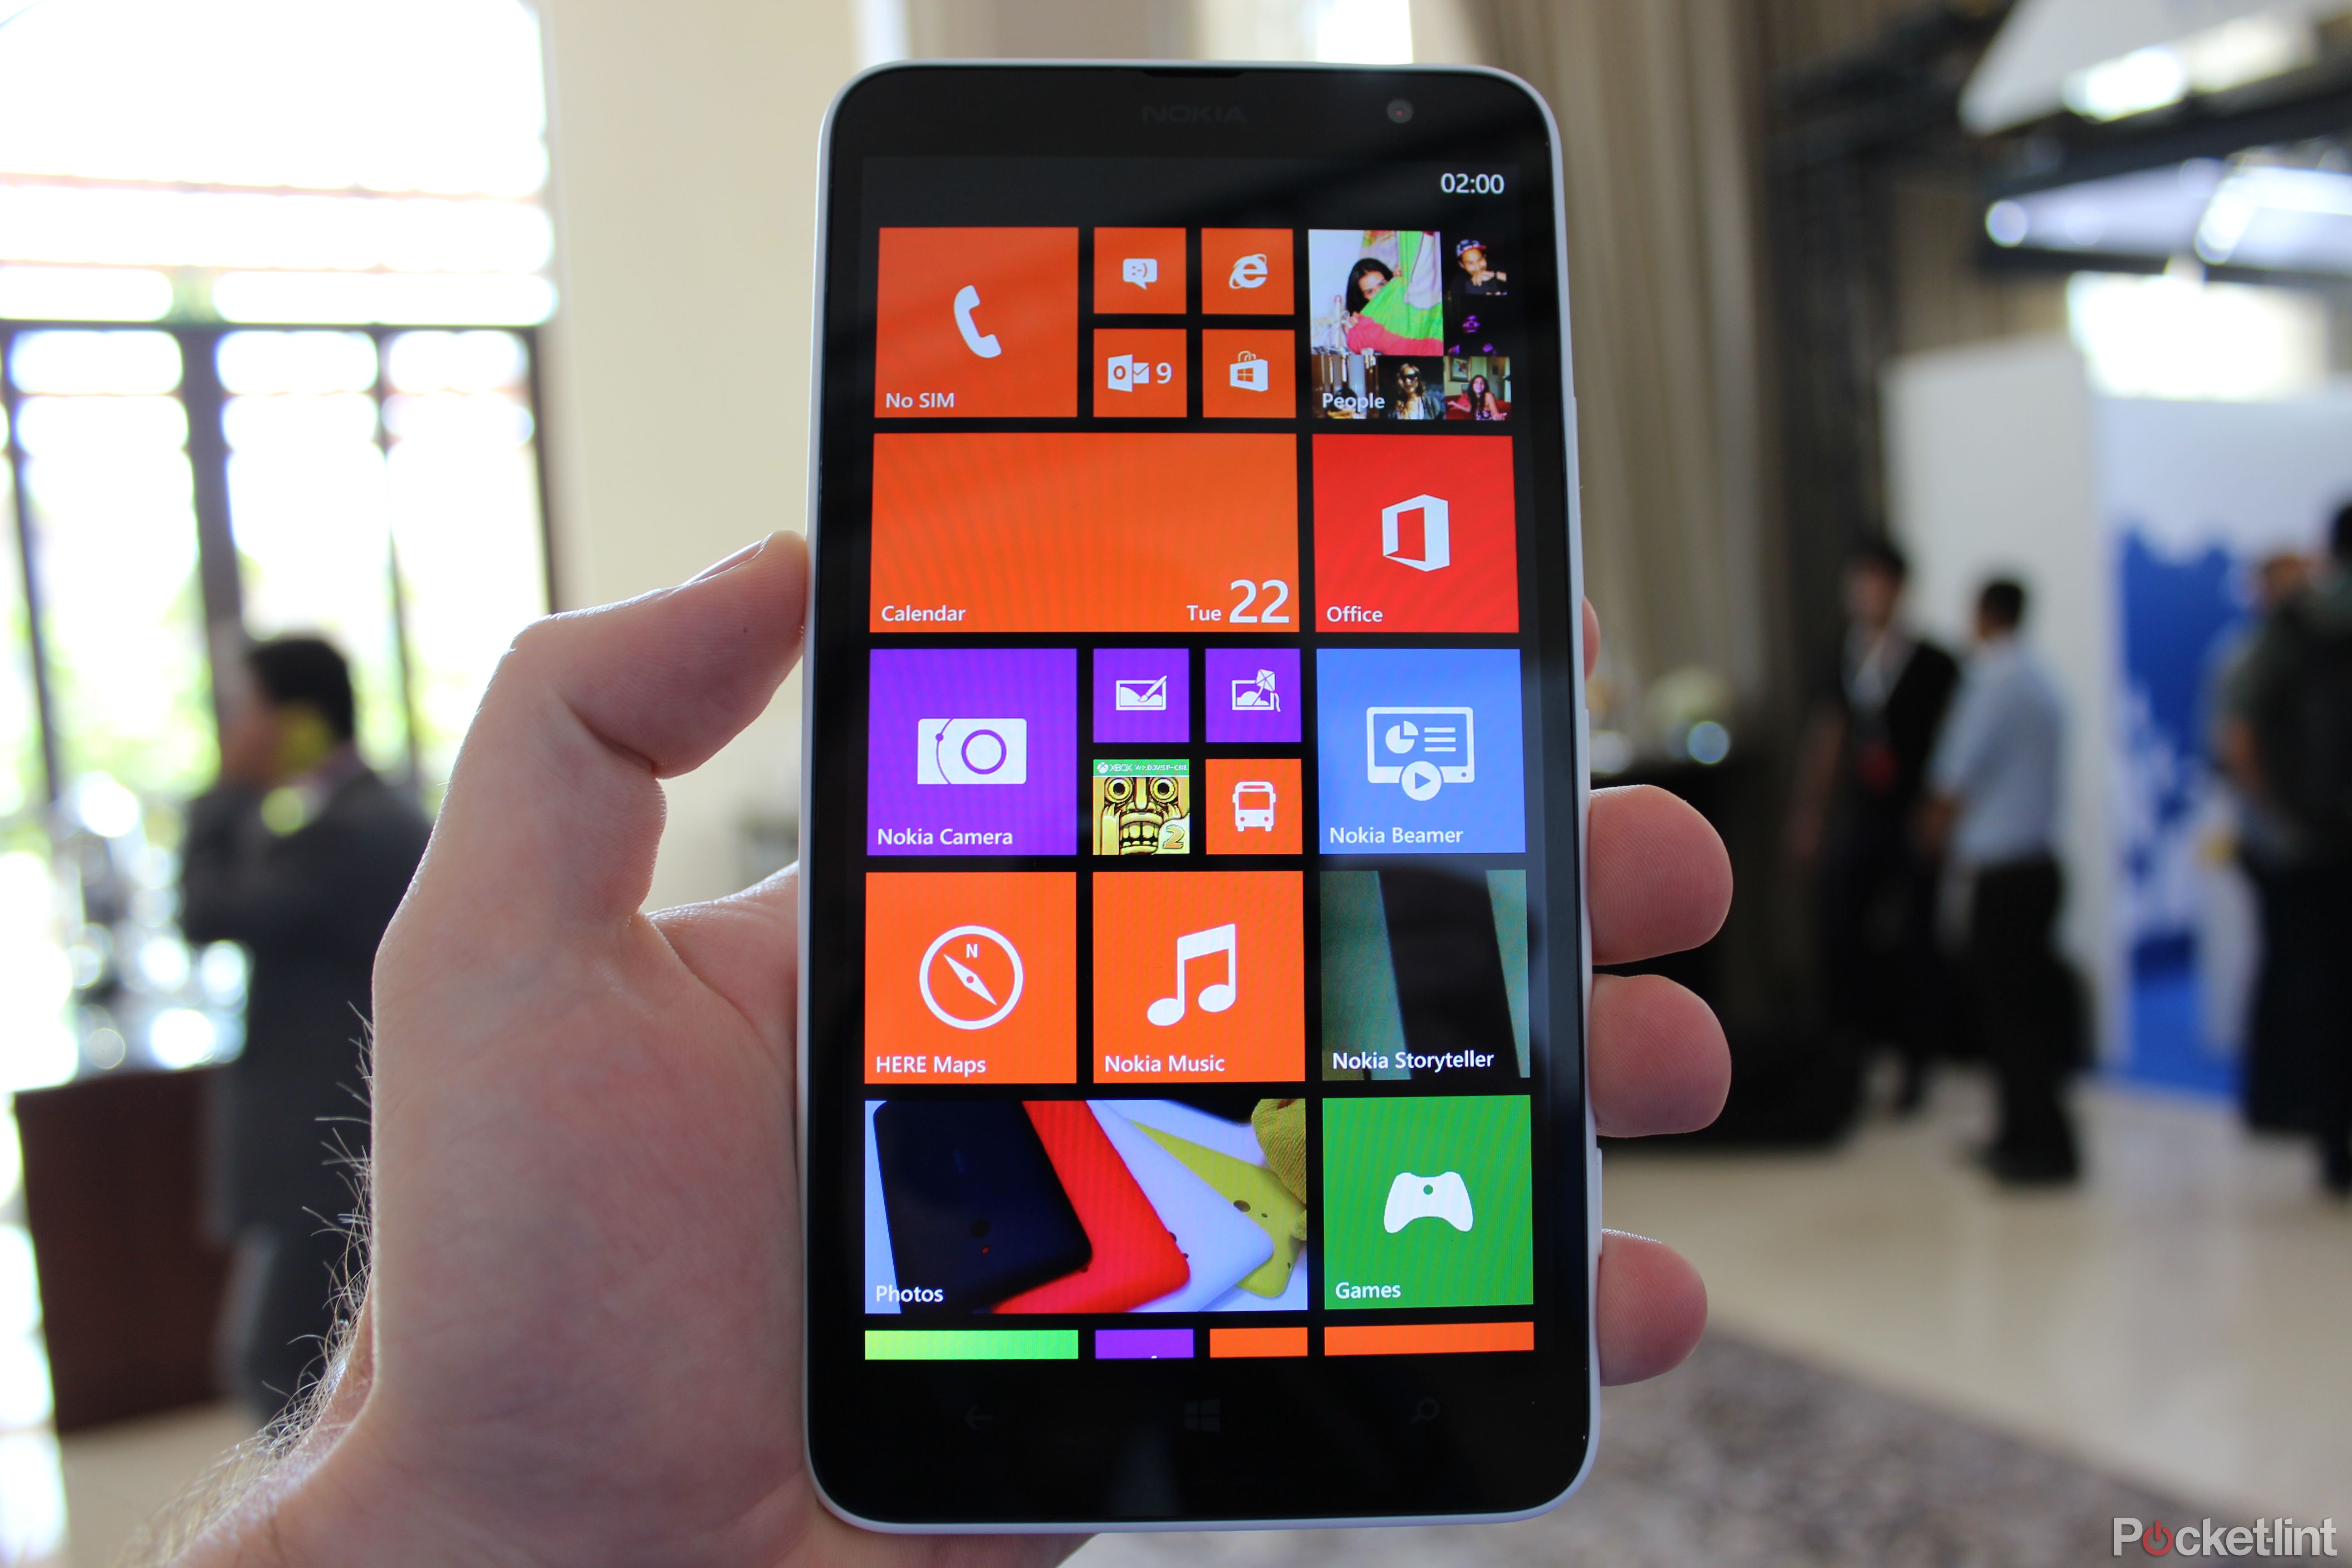 nokia lumia 1320 on sale in the uk from 24 february for free on plenty of contracts image 1